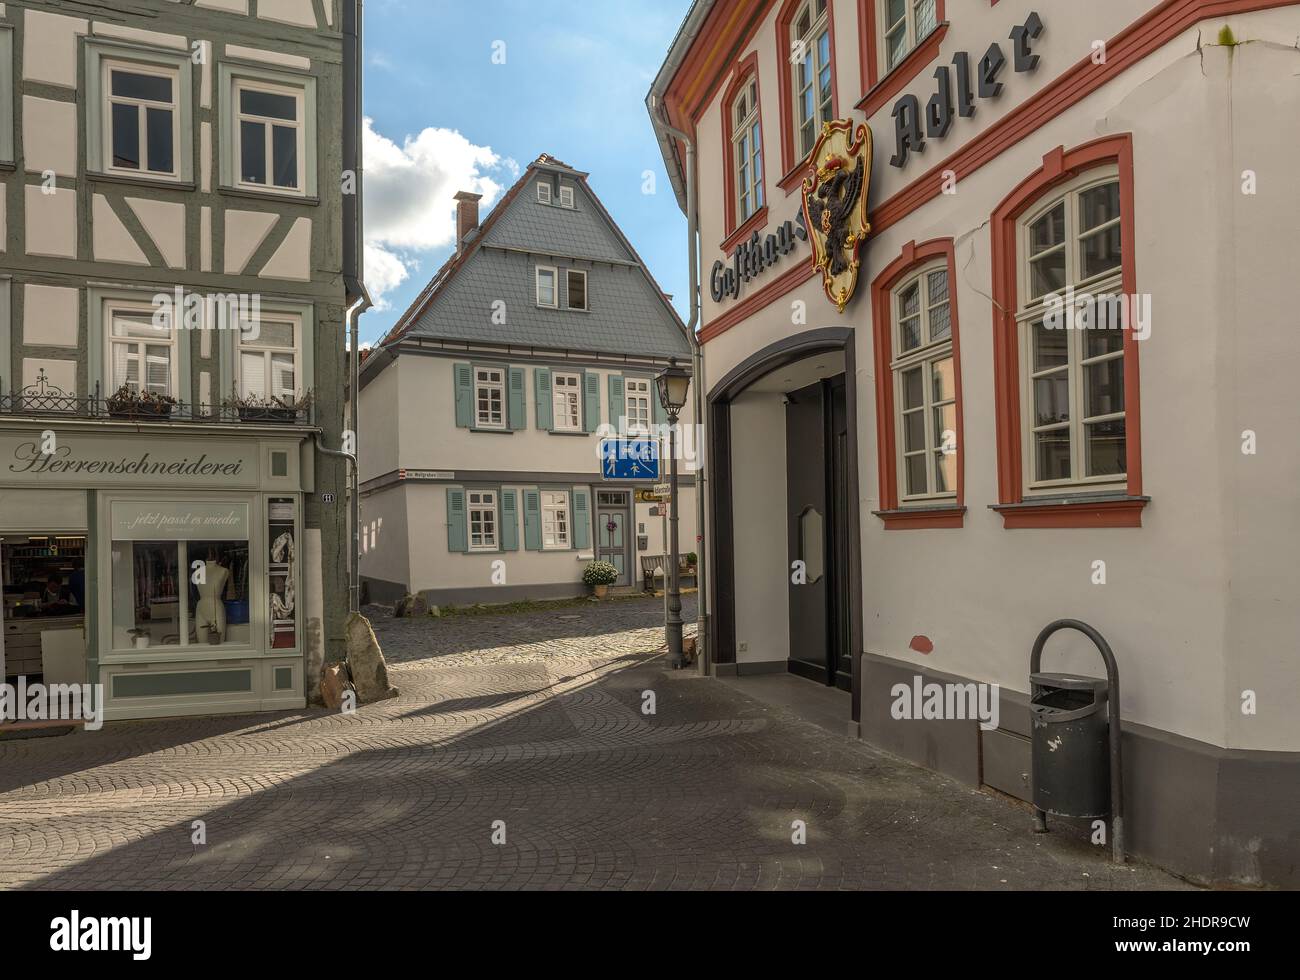 small street with half timbered houses in the historical old town, Kronberg im Taunus, Germany Stock Photo